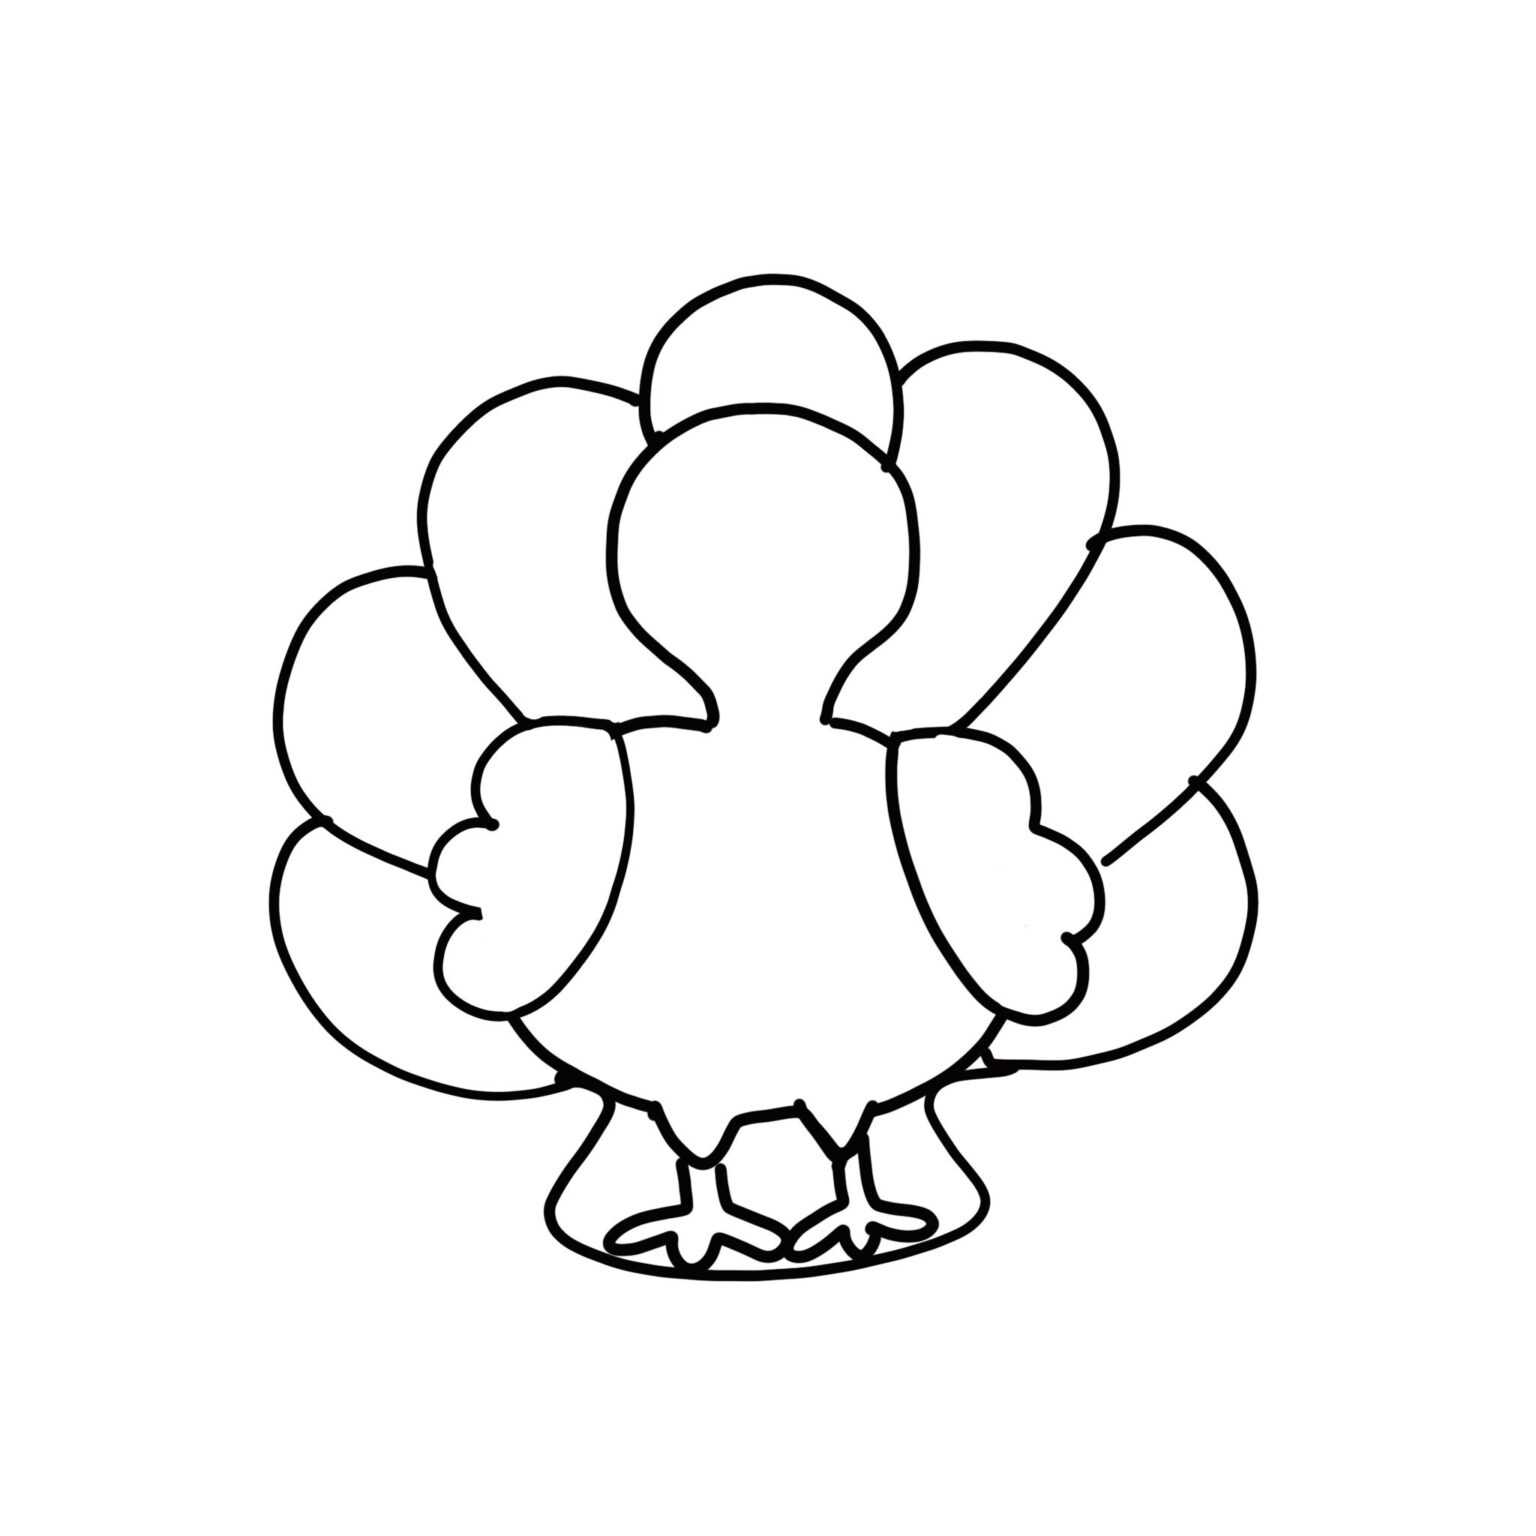 hand-turkey-drawing-template-free-download-best-hand-with-regard-to-blank-turkey-template